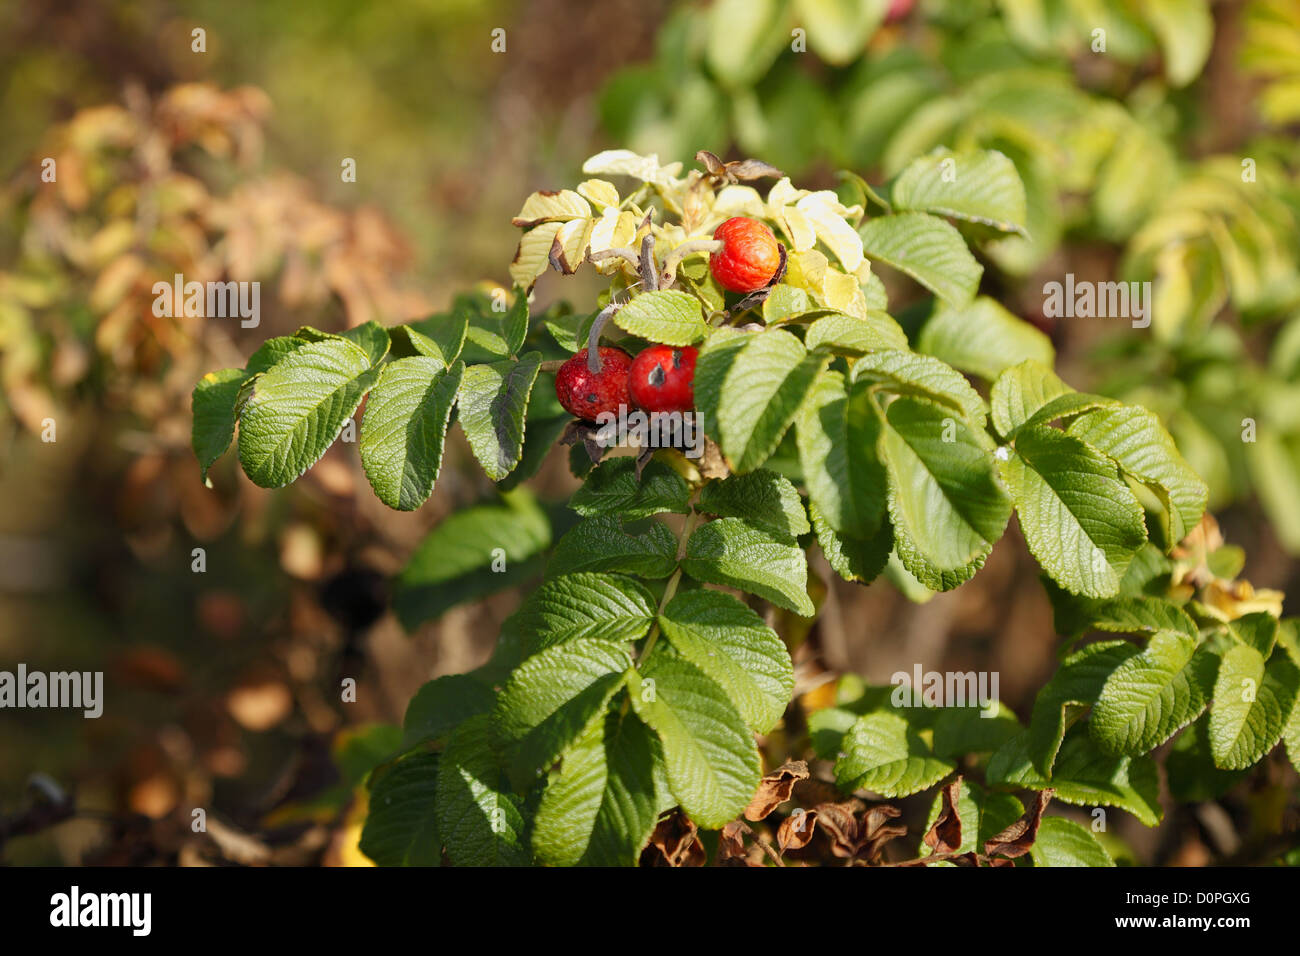 The Calendar of the seasons, wild roses in autumn Stock Photo